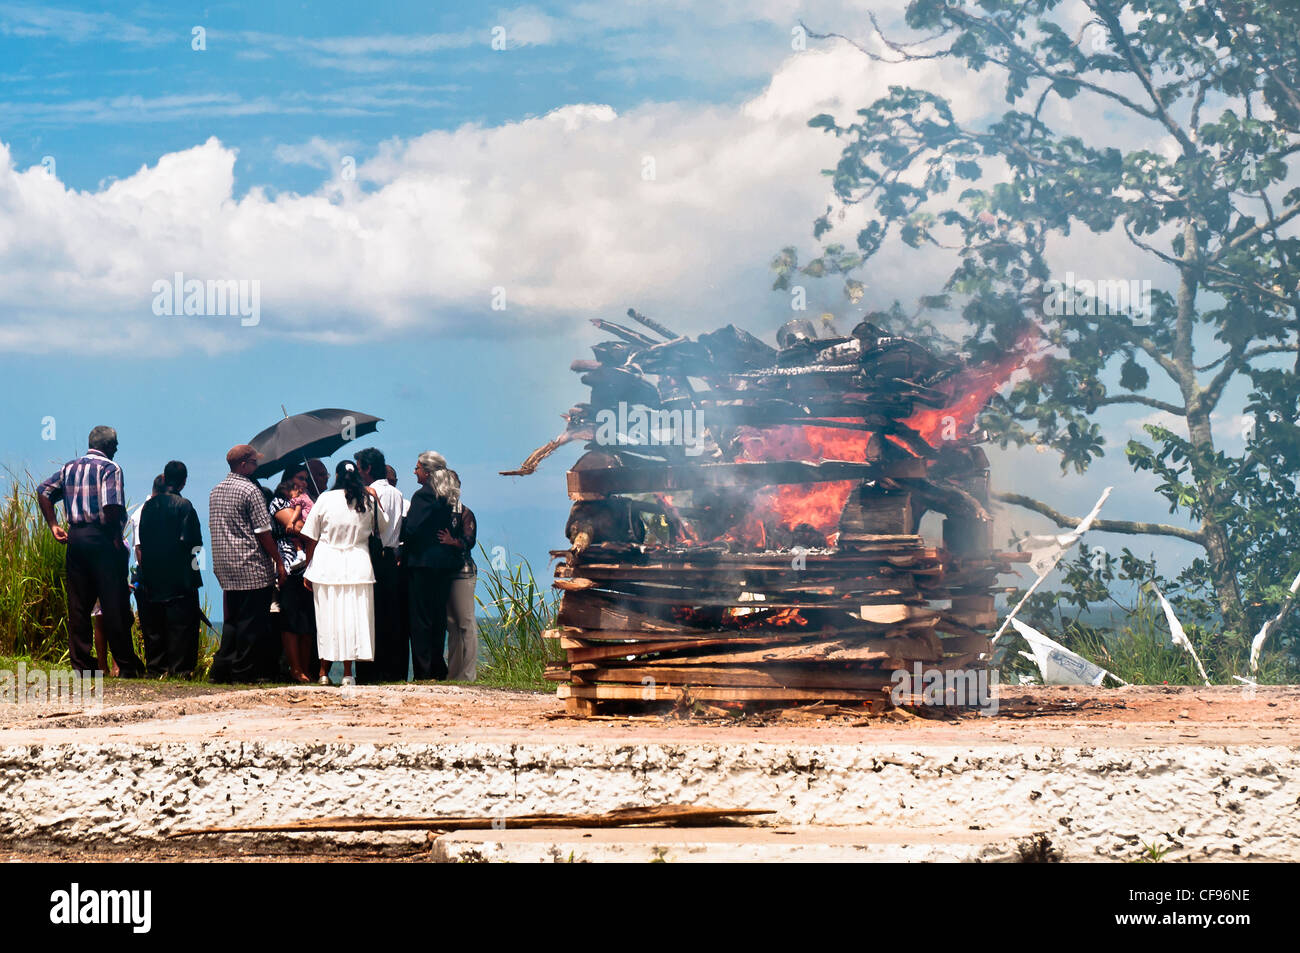 Hindu funeral rights of burning the body on a tall wooden funeral pyre sometimes take place on the beaches near San Fernando. Stock Photo